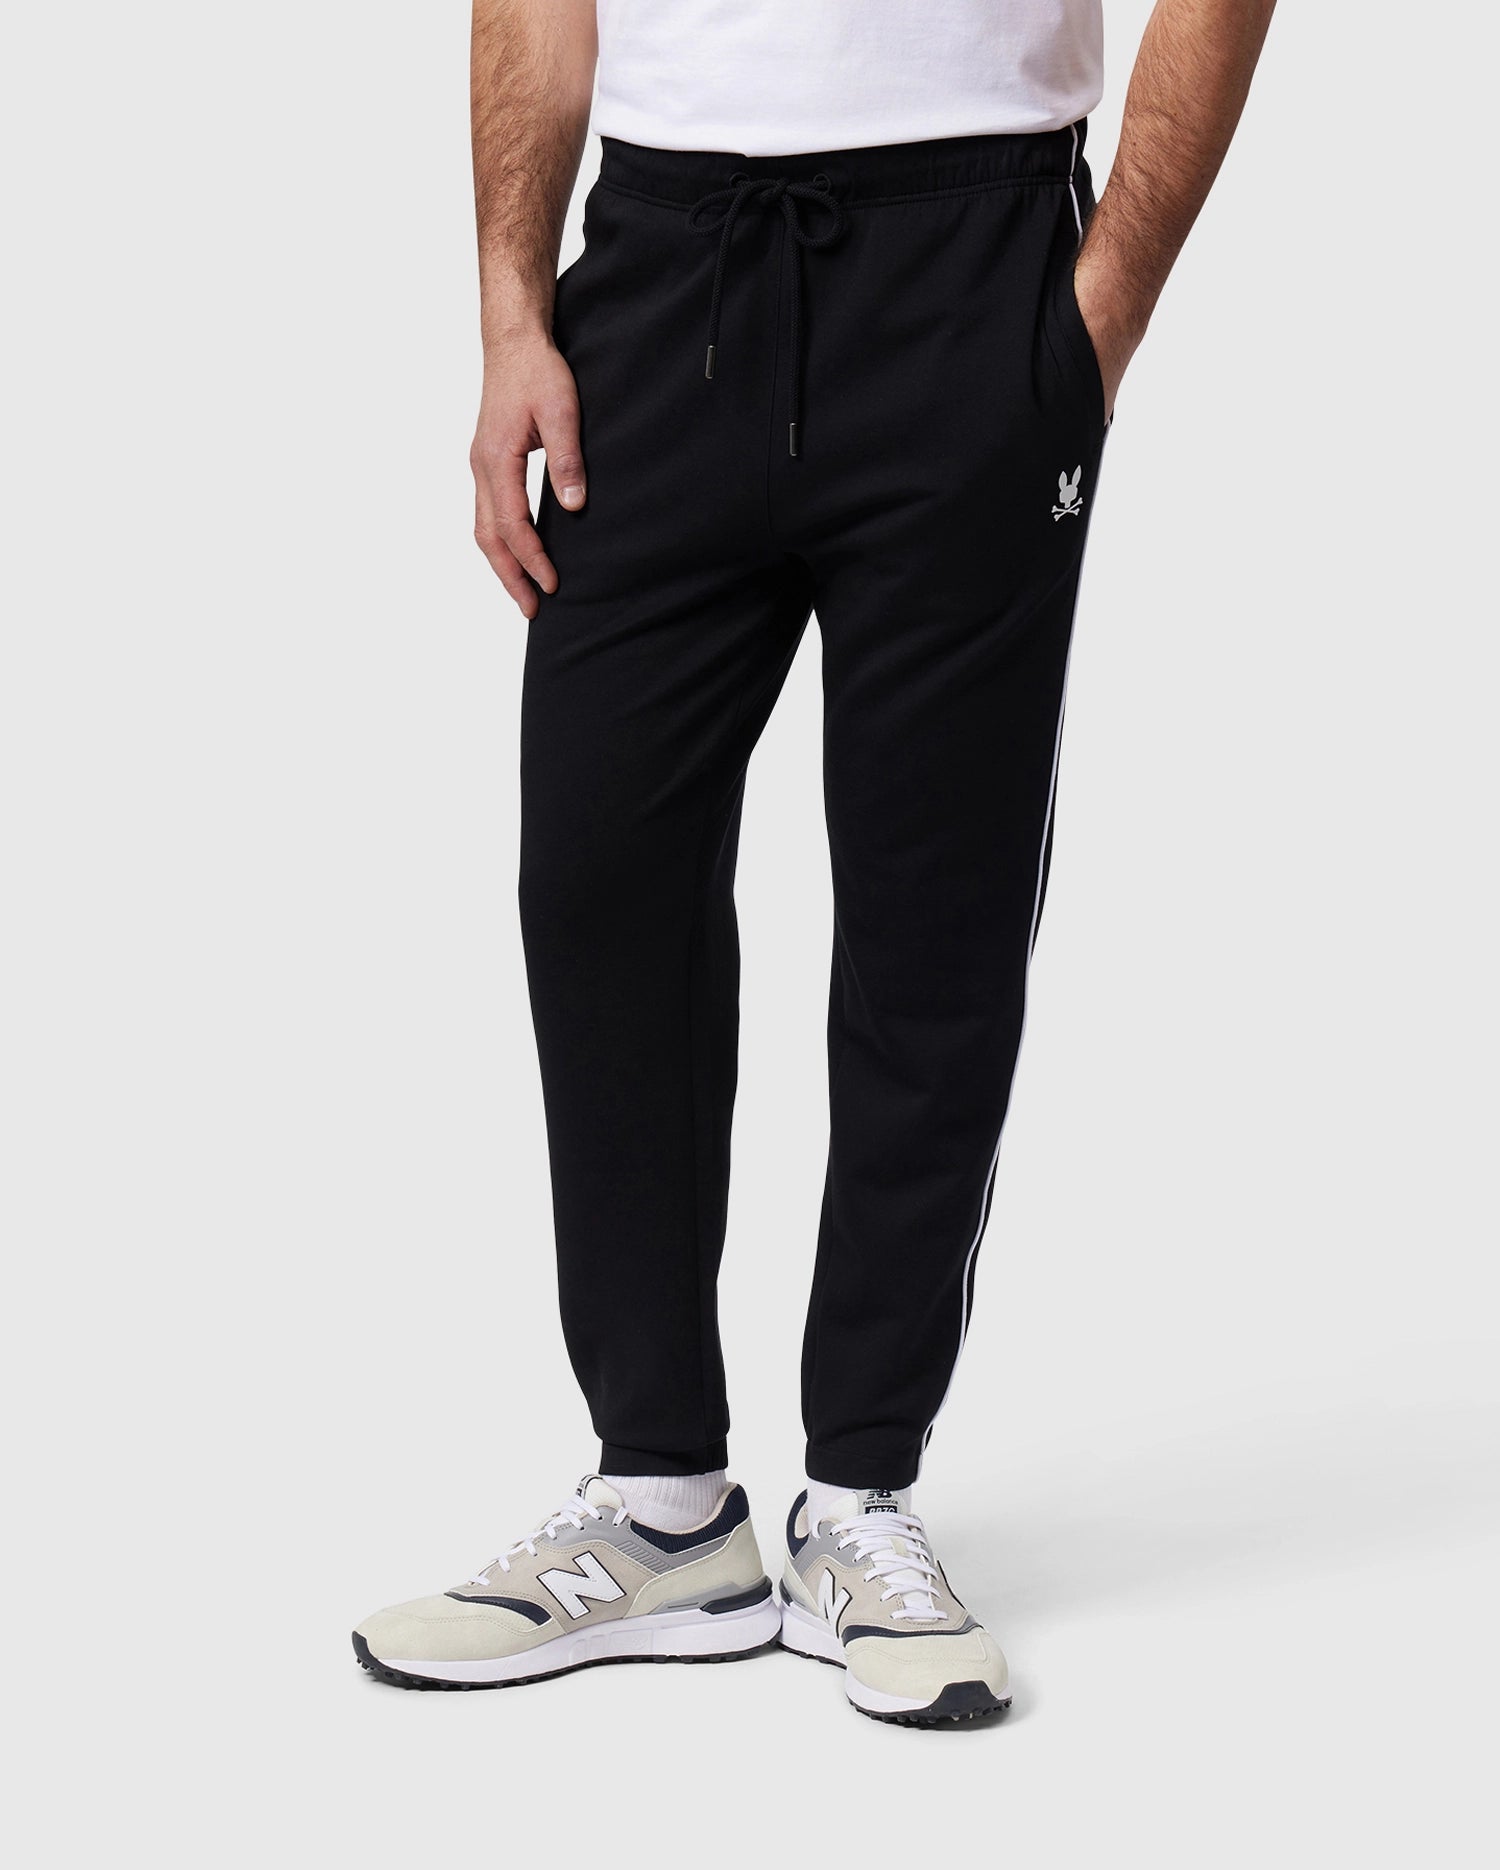 Psycho Bunny Men's Sweatpants Collection Comfy and Stylish